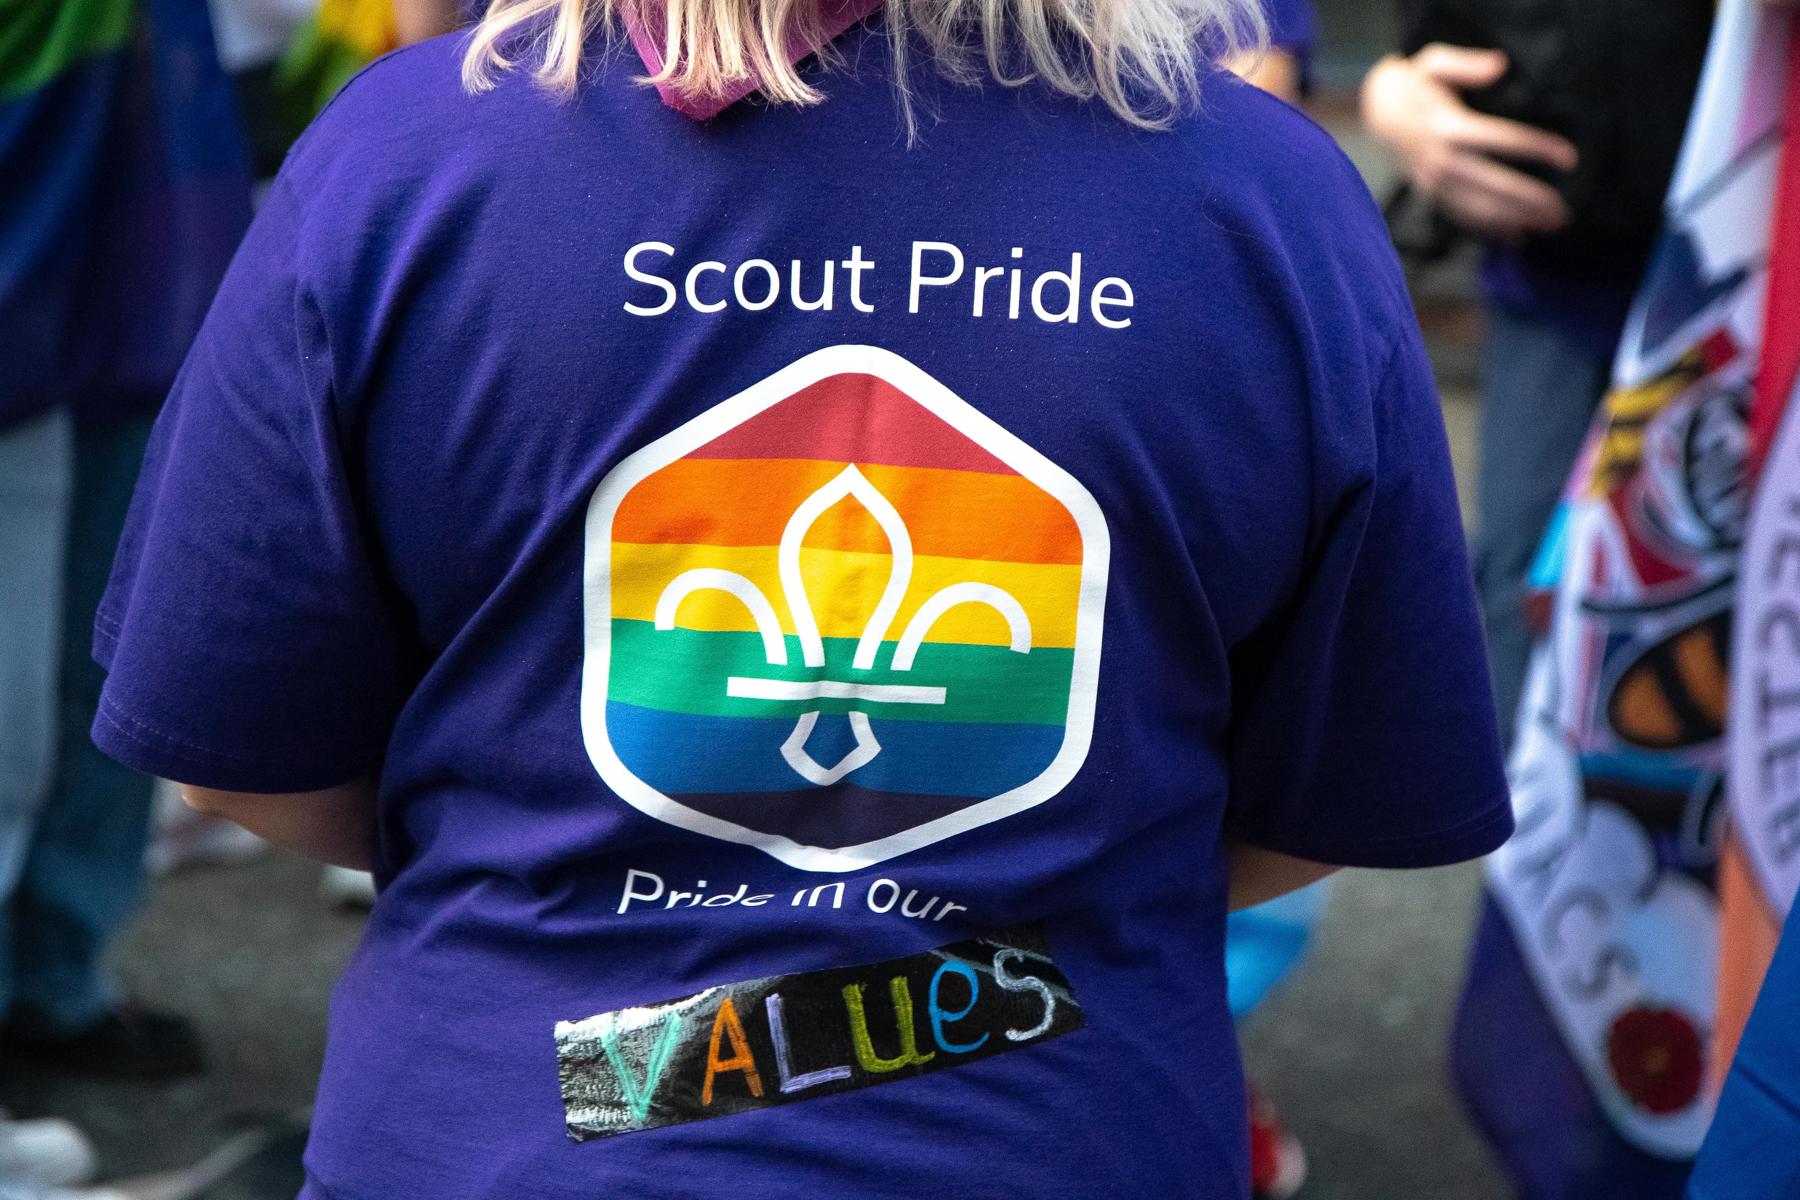 Back view of someone wearing a purple t-shirt with a Scout Pride badge and the words 'Scout Pride: Pride in Our Values'